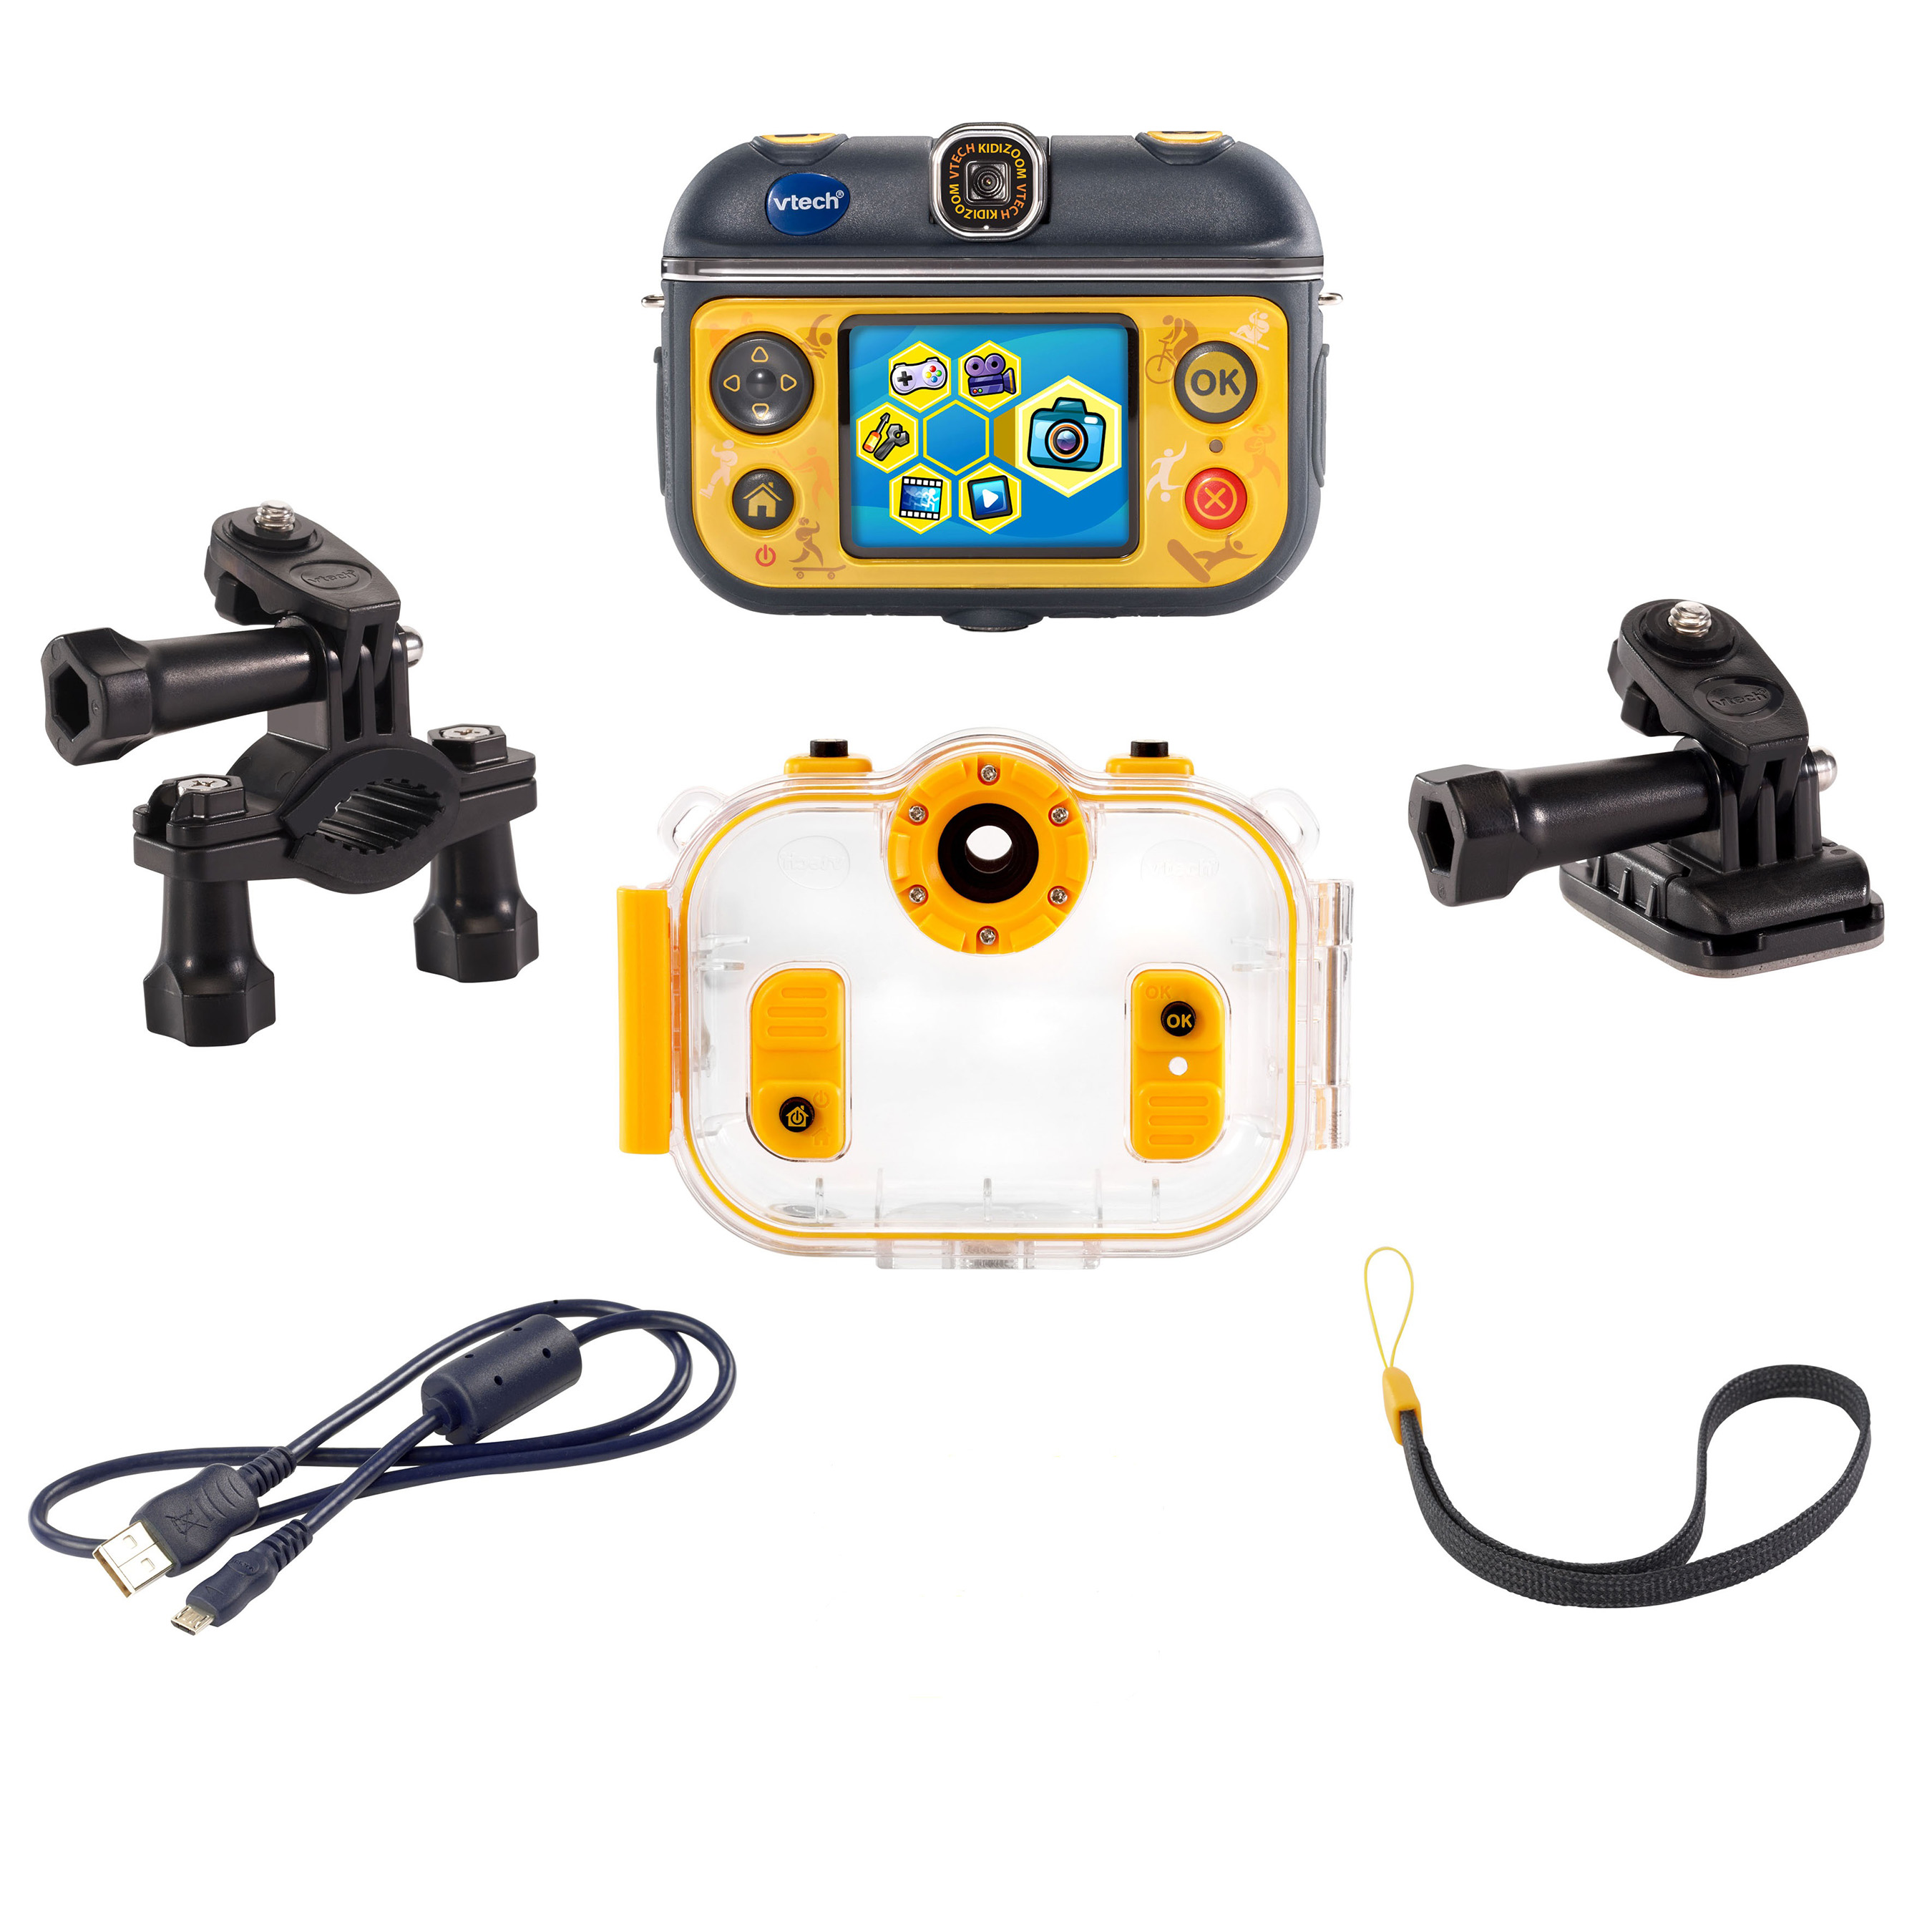 Kidizoom Action Cam 180 (included accessories)